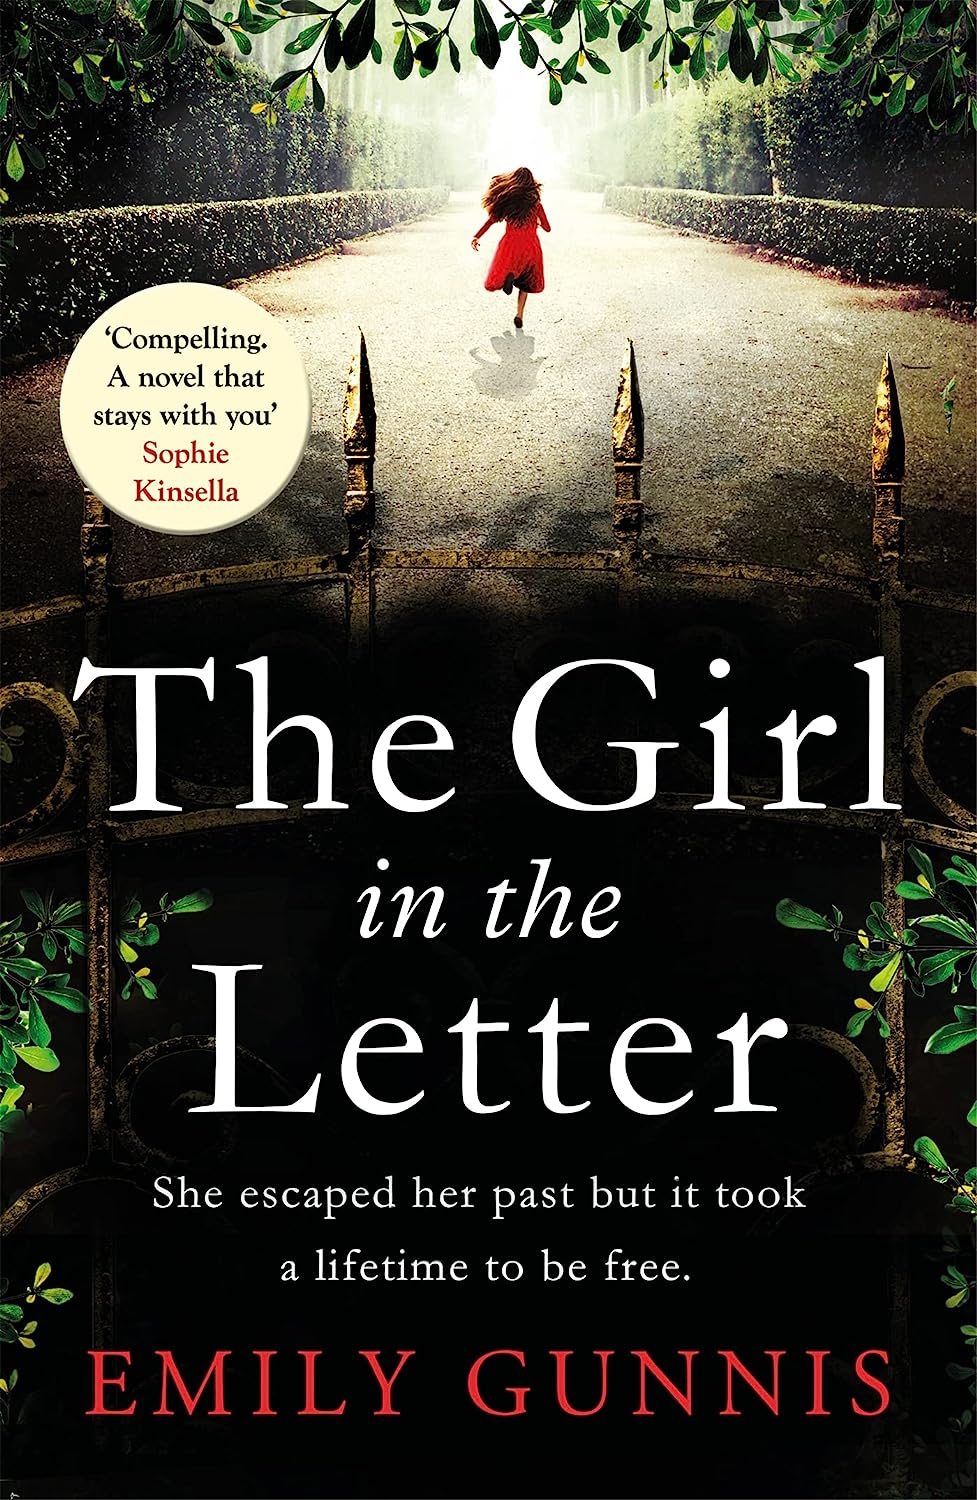 The Girl in the Letter -$.99 Ebook 94% Off (Amazon) $0.99